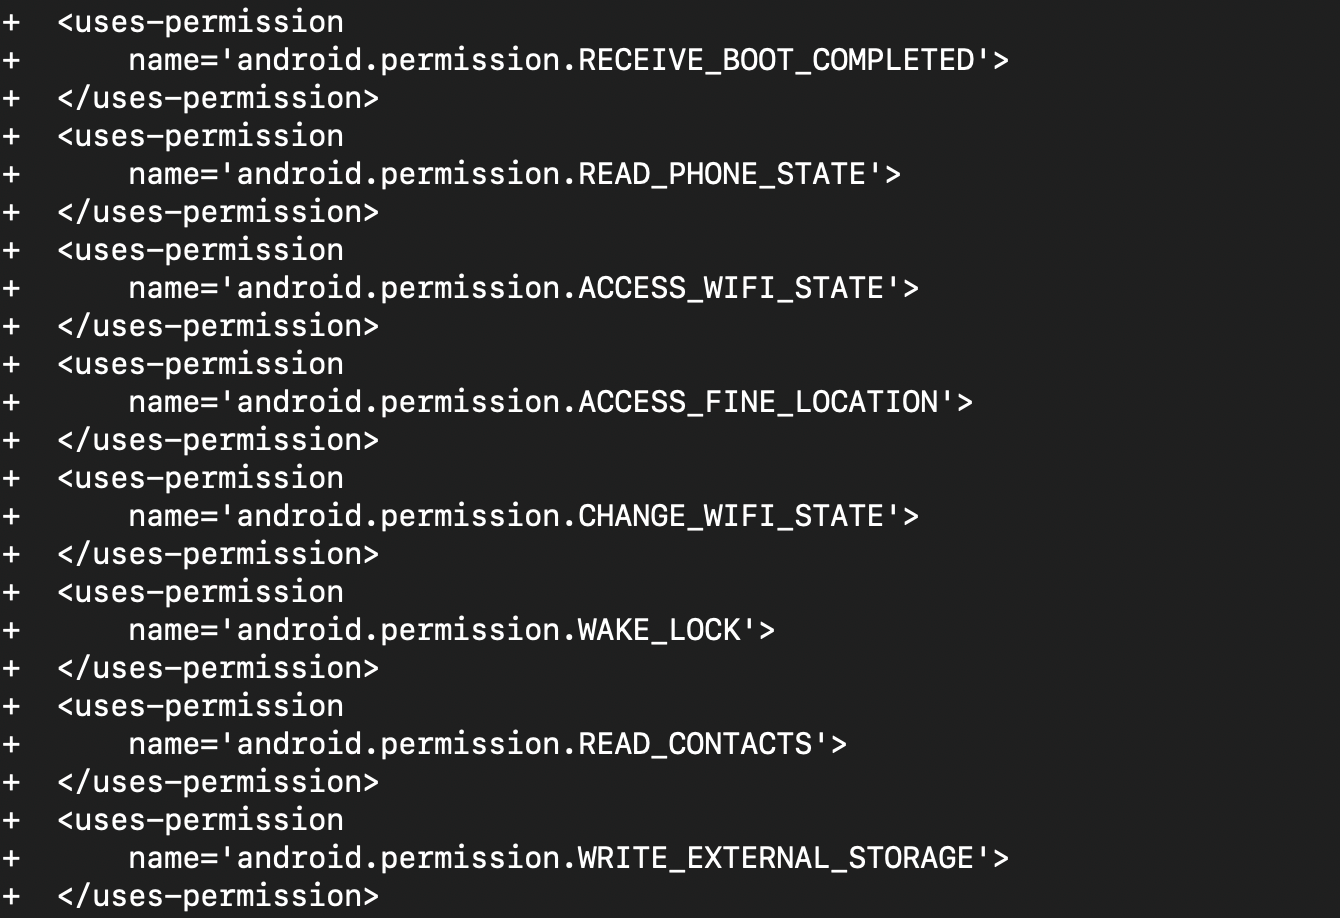 Figure 2. The modified AndroidManifest.xml of the malicious app